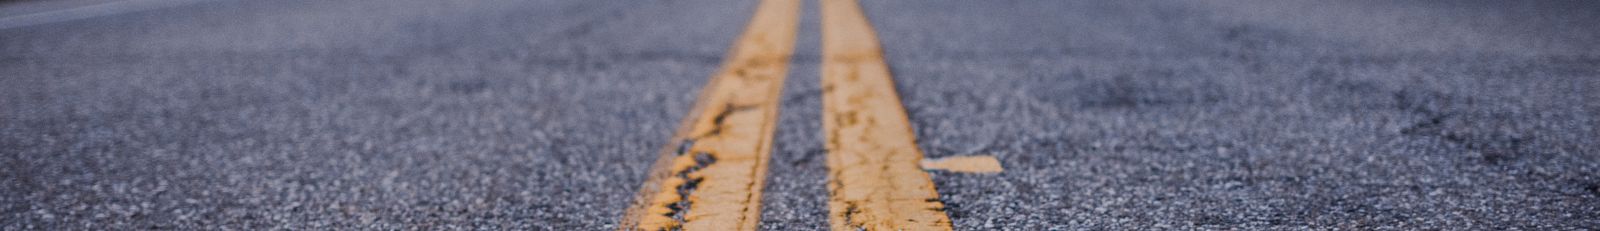 Image of road with painted lines.